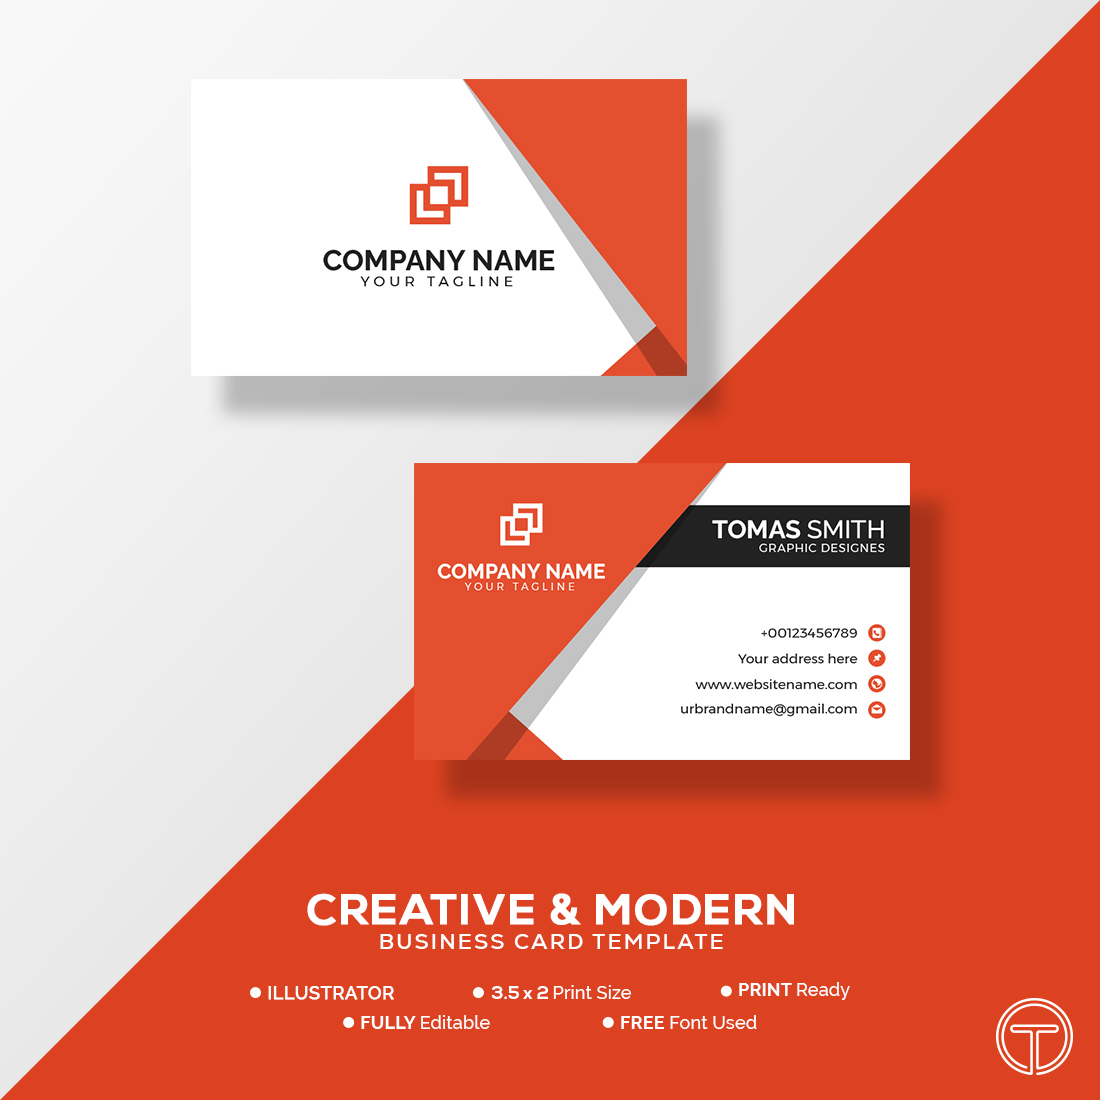 business card and visiting card design for print ready for 6 1 1